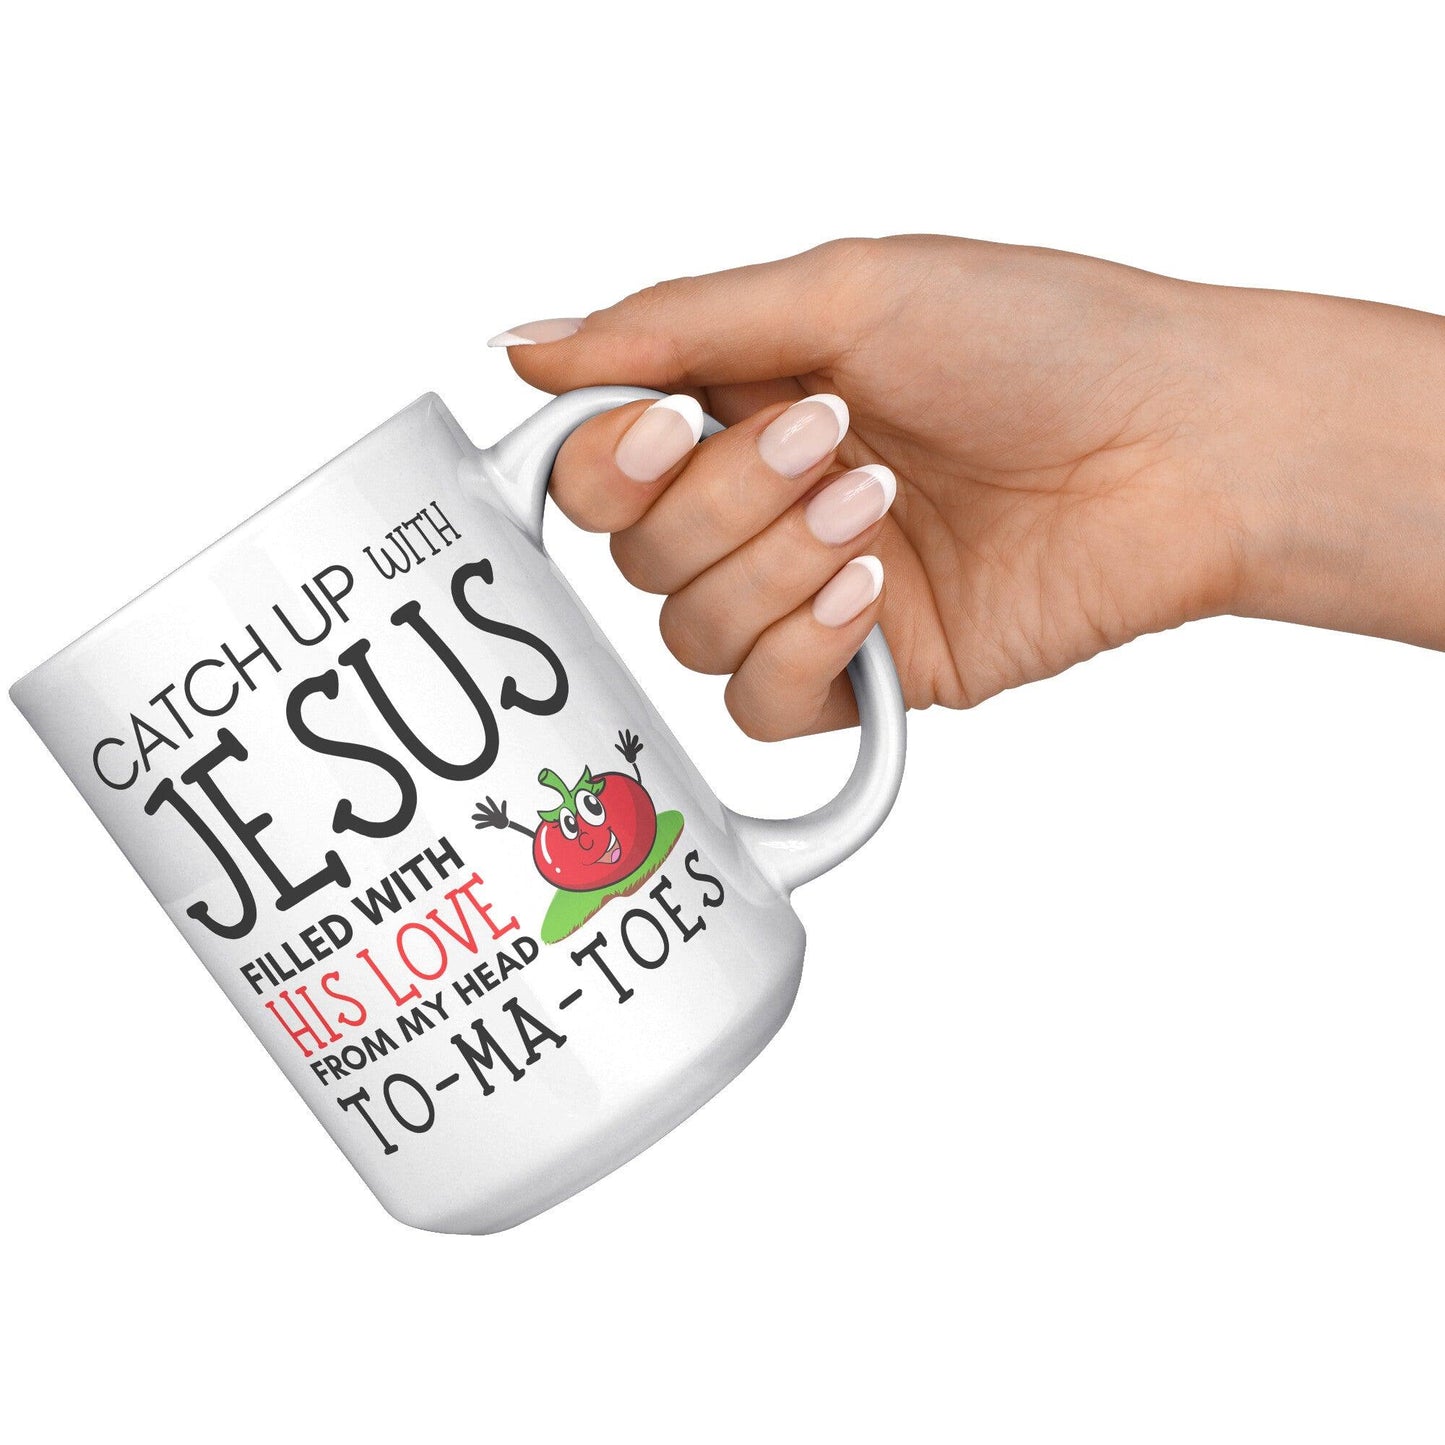 Catch Up with Jesus Filled With His Love From My Head Tomatoes Christian White Mug - TheGivenGet